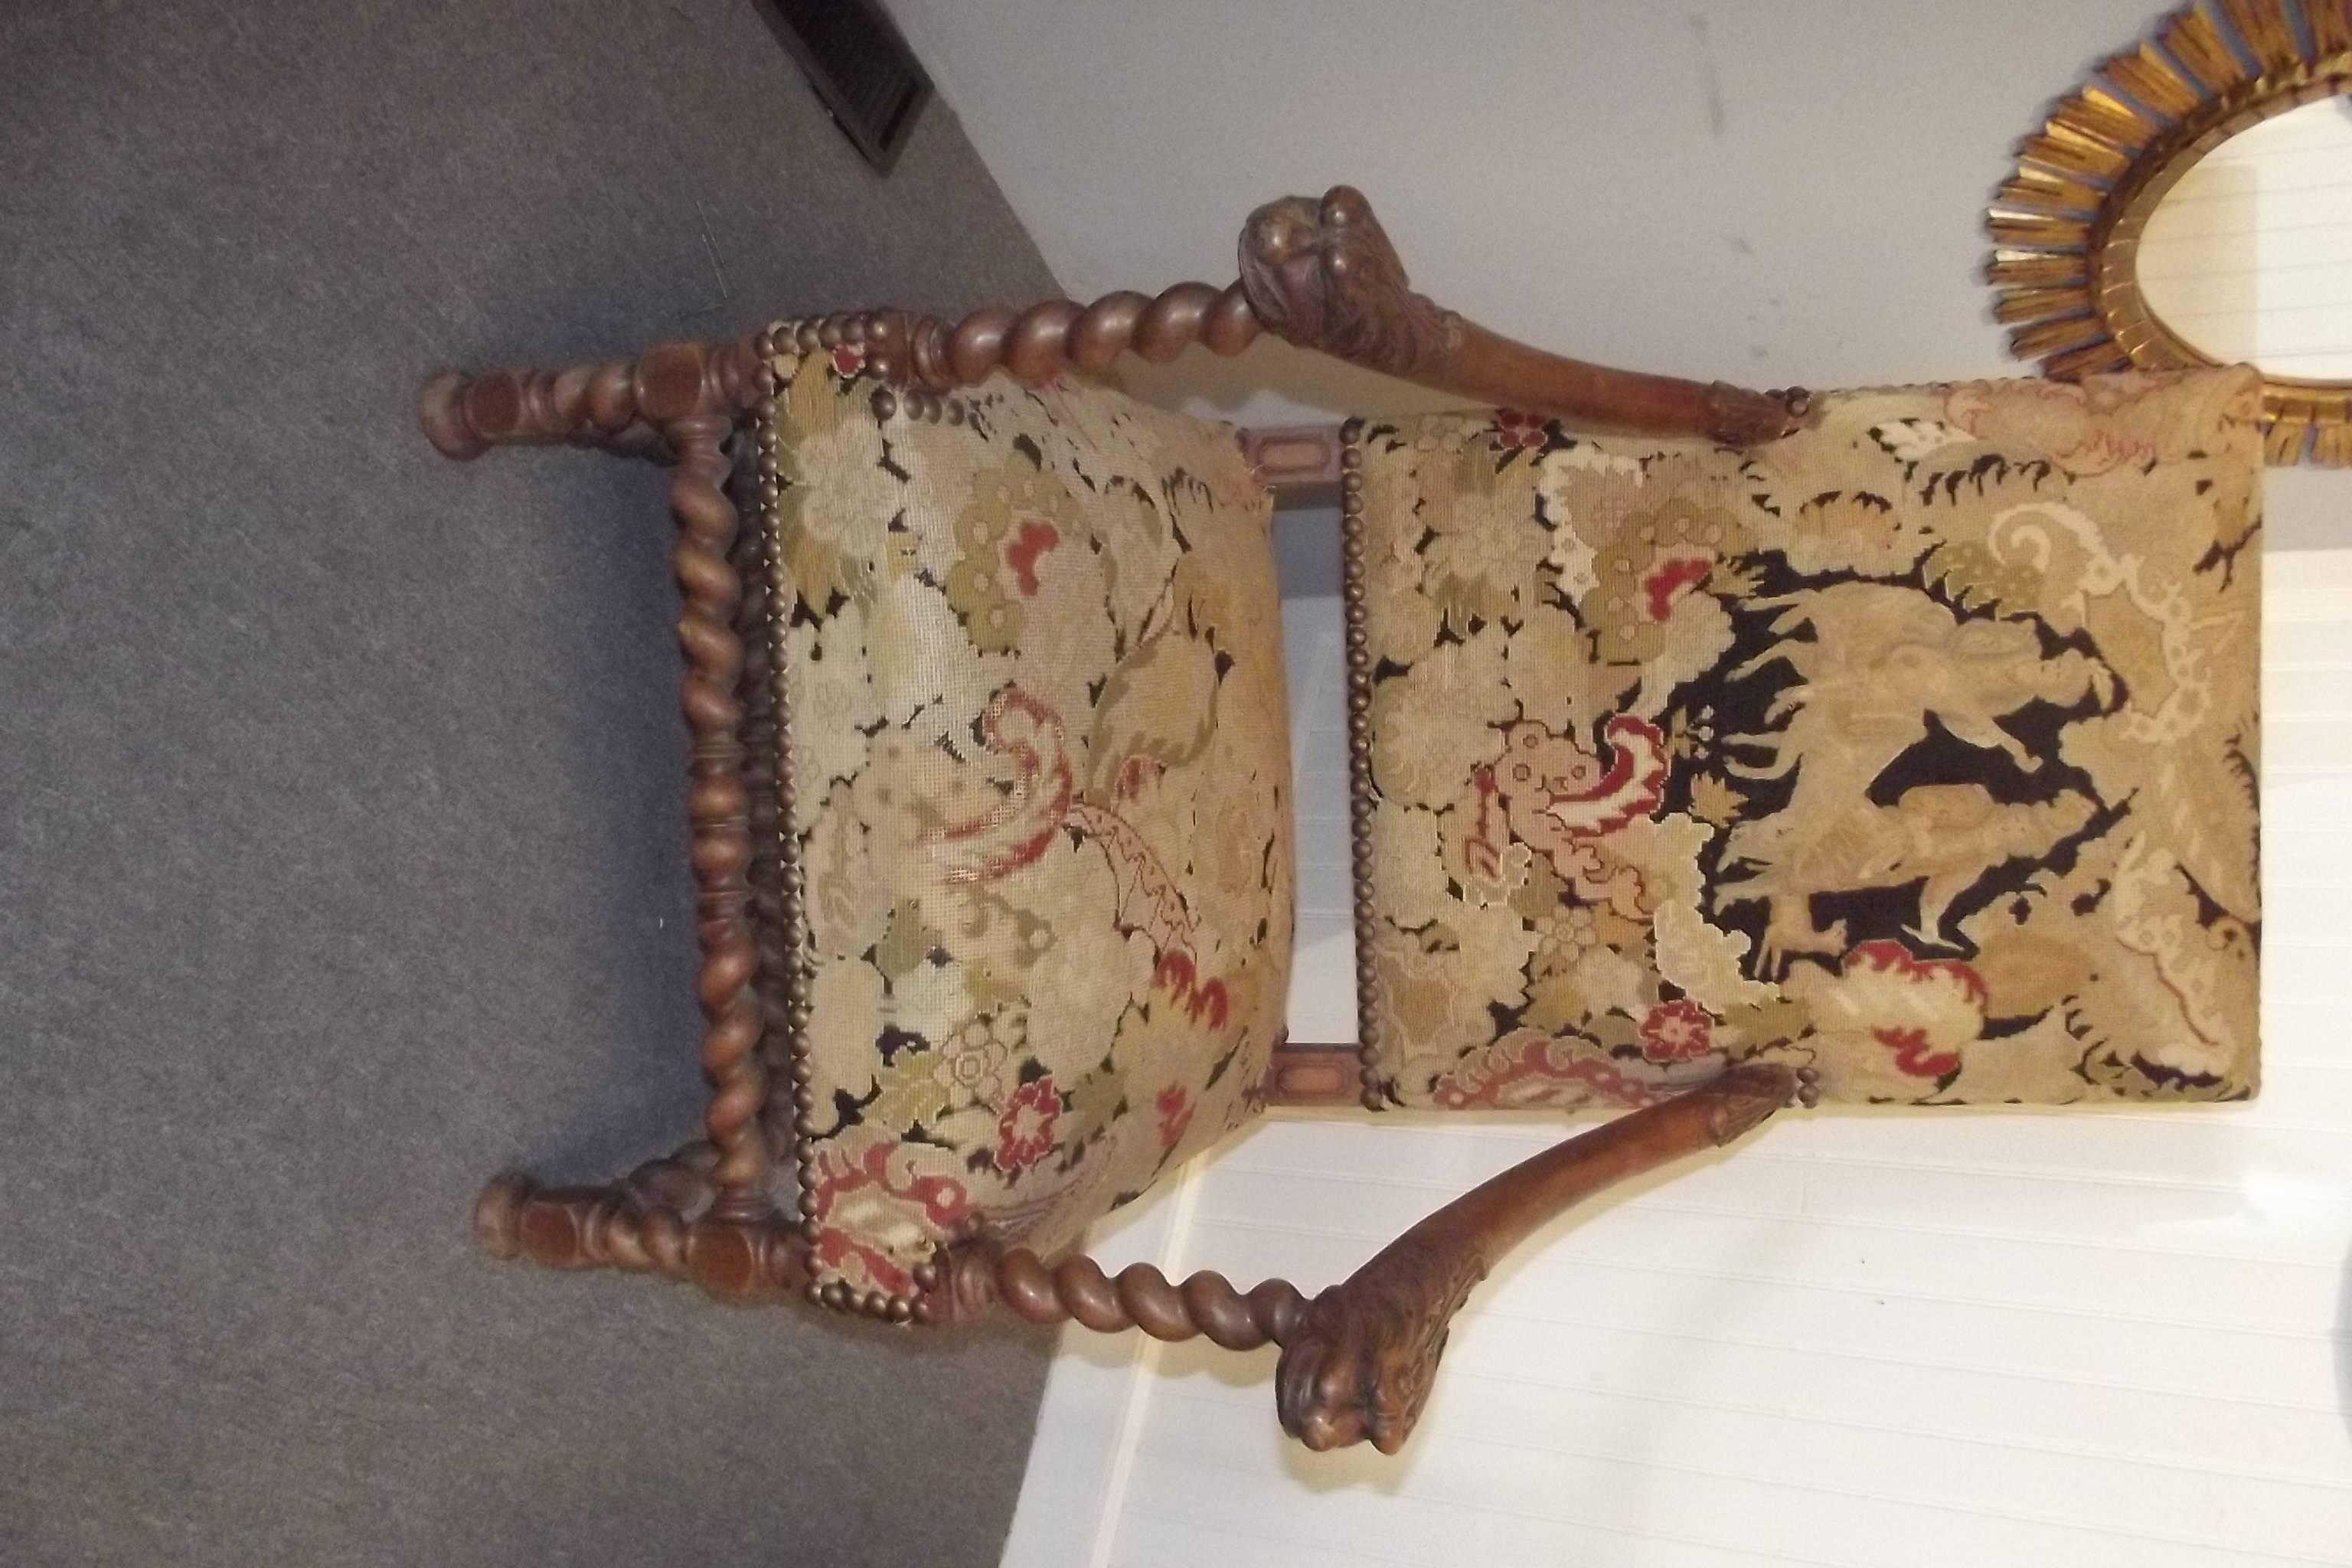 A pair of armchairs in the style of Louis XIII with their original needle point and petite point upholstery.  The frames have extensive overall carving.  The chairs are in good structural condition with expected wear to the original upholstery